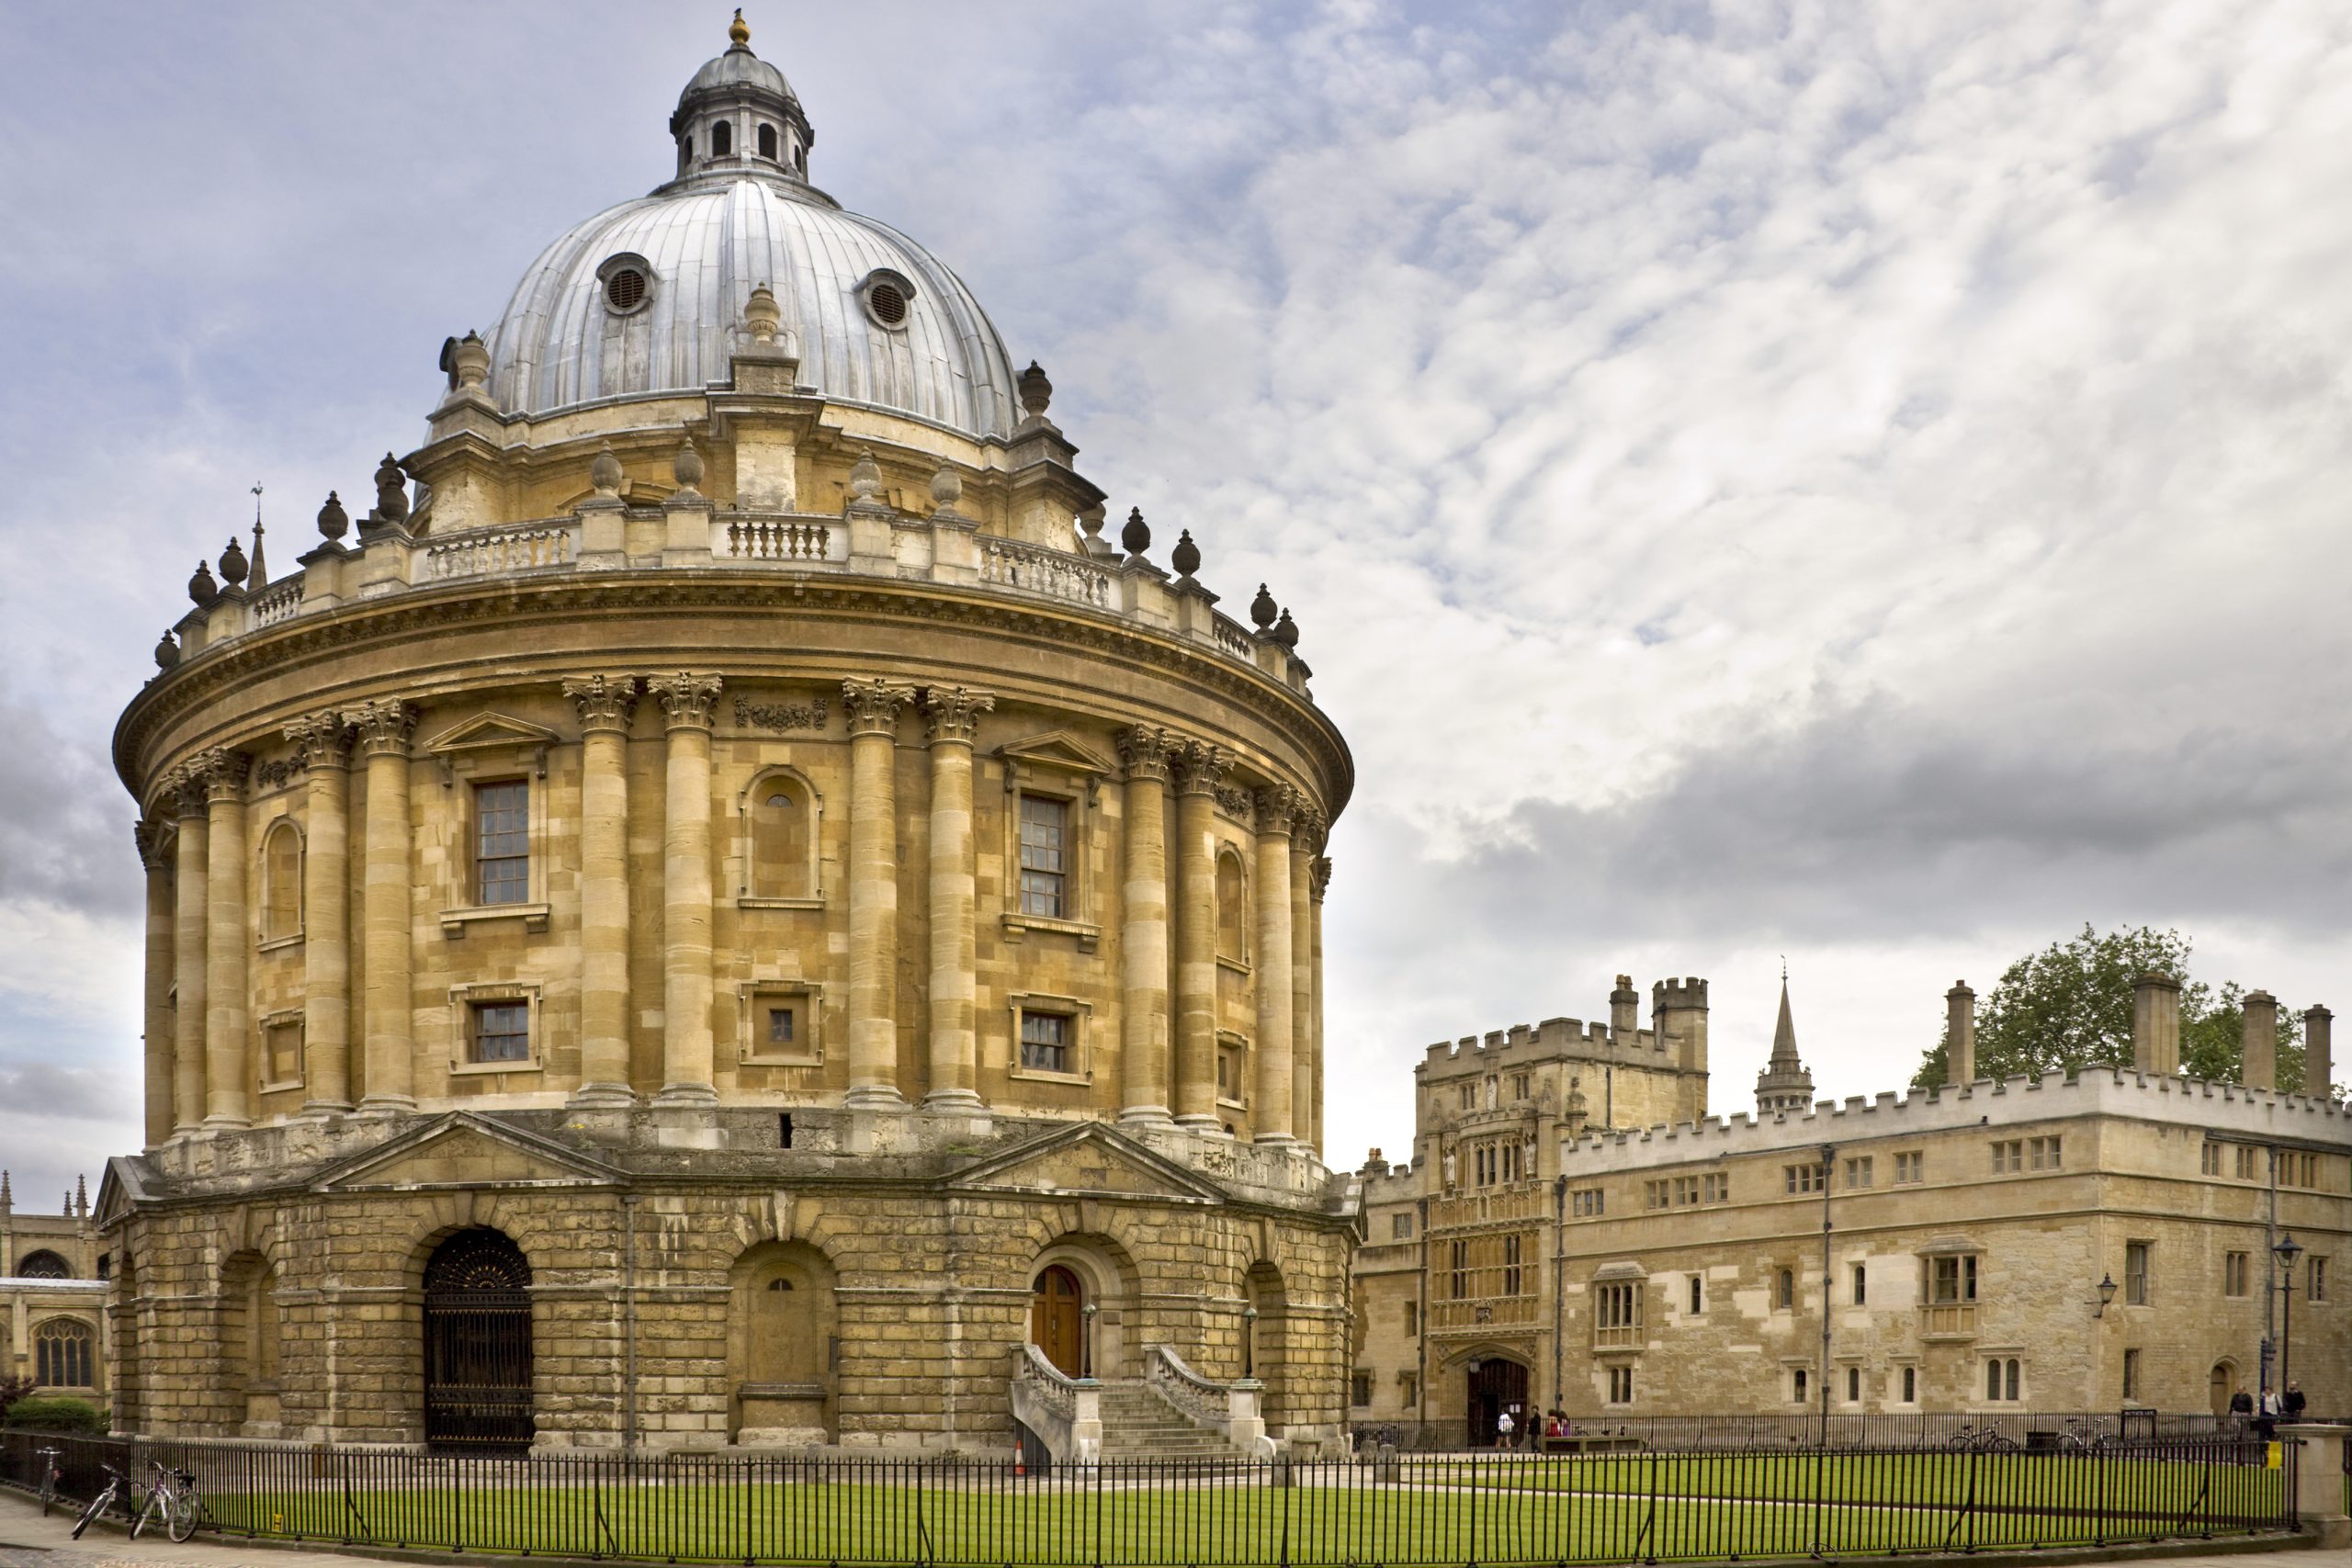 The Radcliffe Camera at University of Oxford